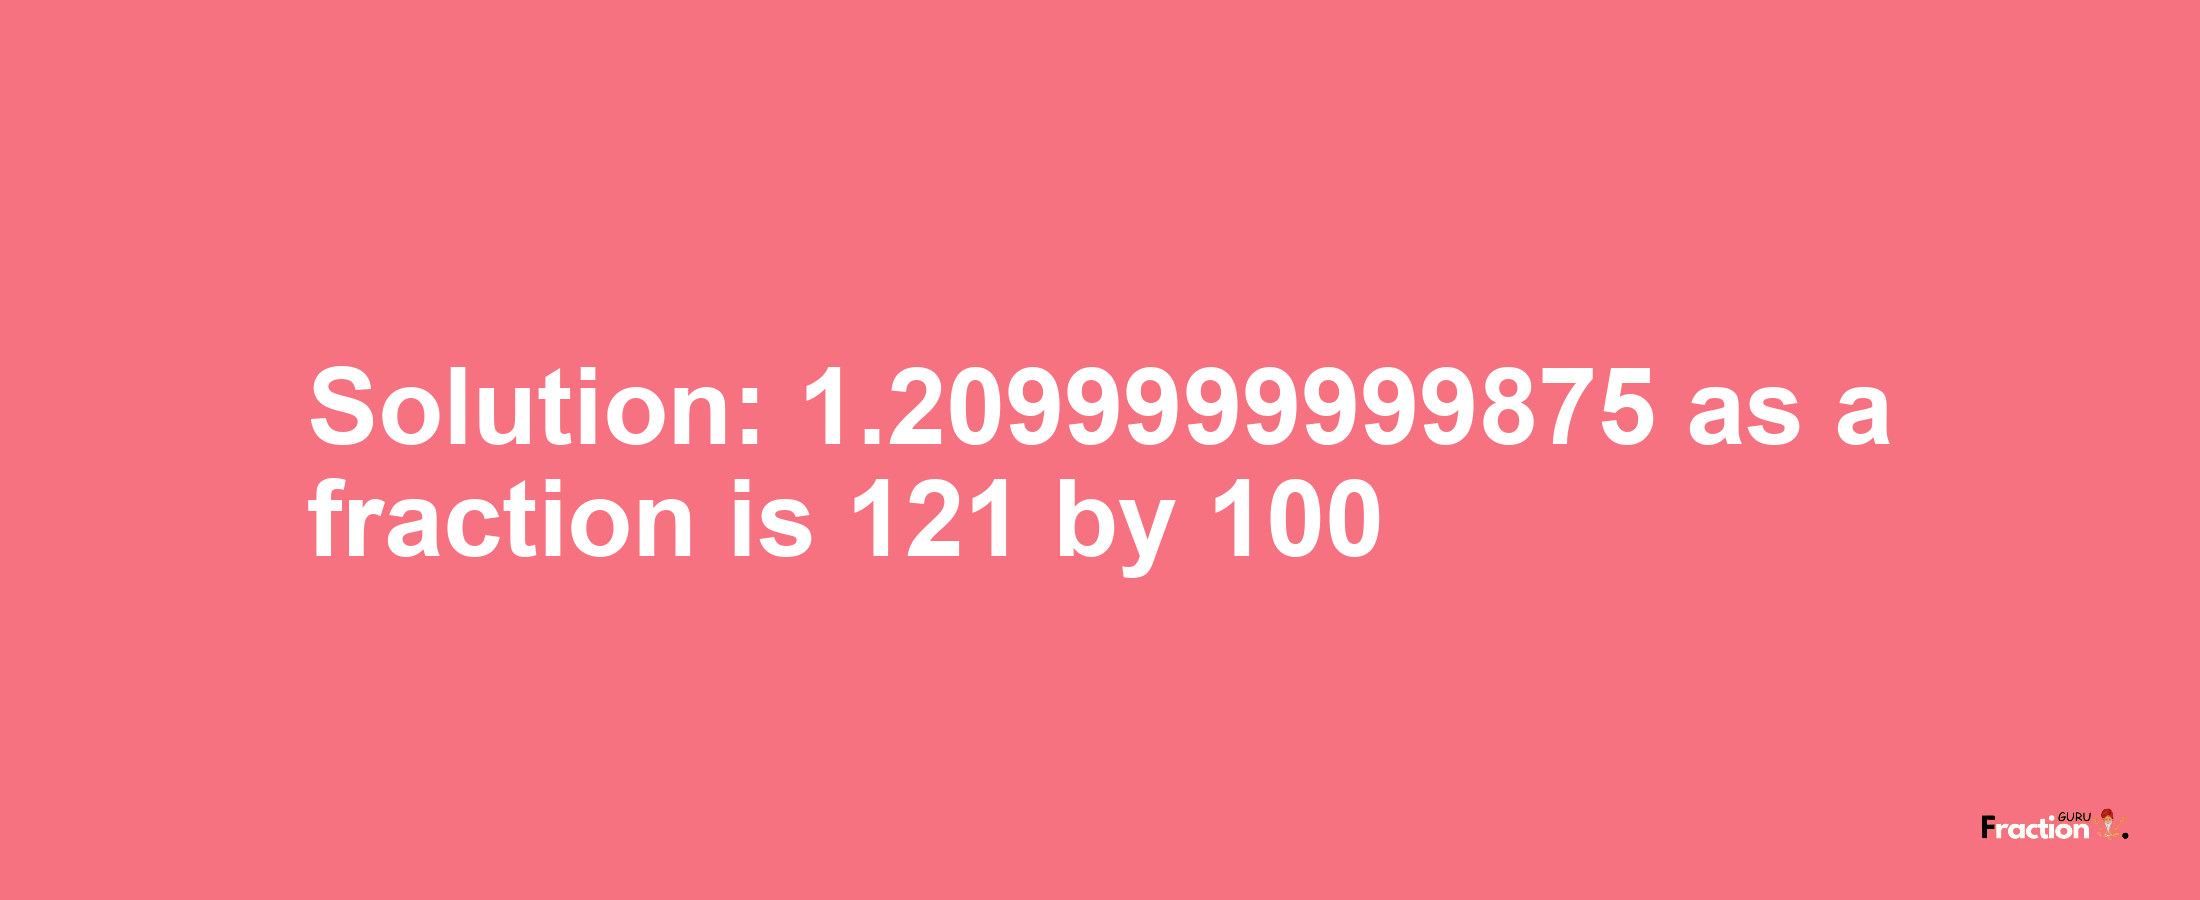 Solution:1.2099999999875 as a fraction is 121/100